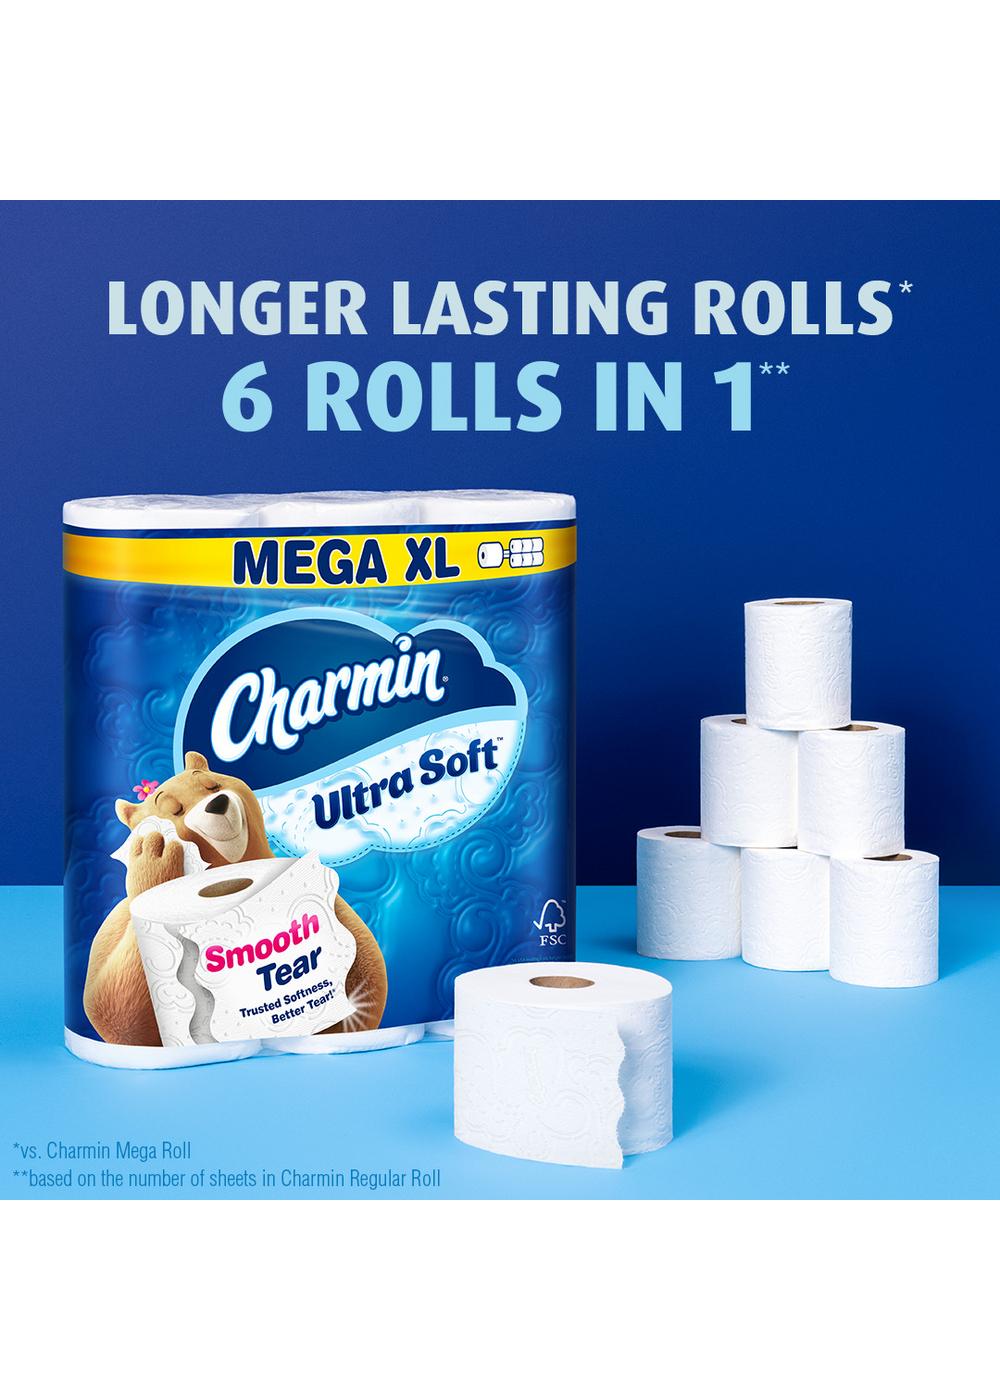 Charmin Ultra Soft Smooth Tear Toilet Paper; image 3 of 4